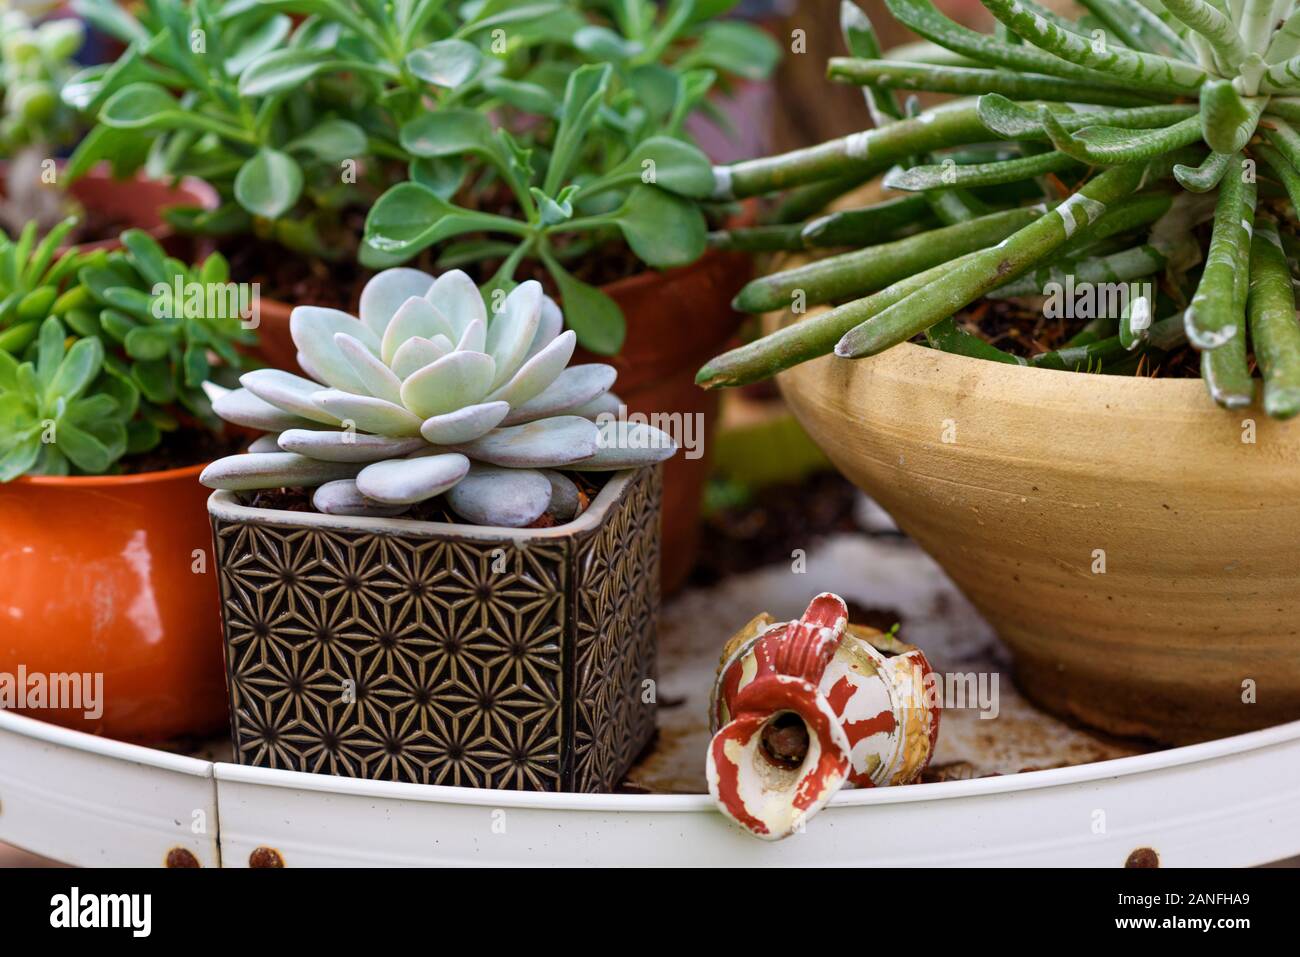 Various Succulent Plants Pots At Homemade Stand In A Garden. Stock Photo